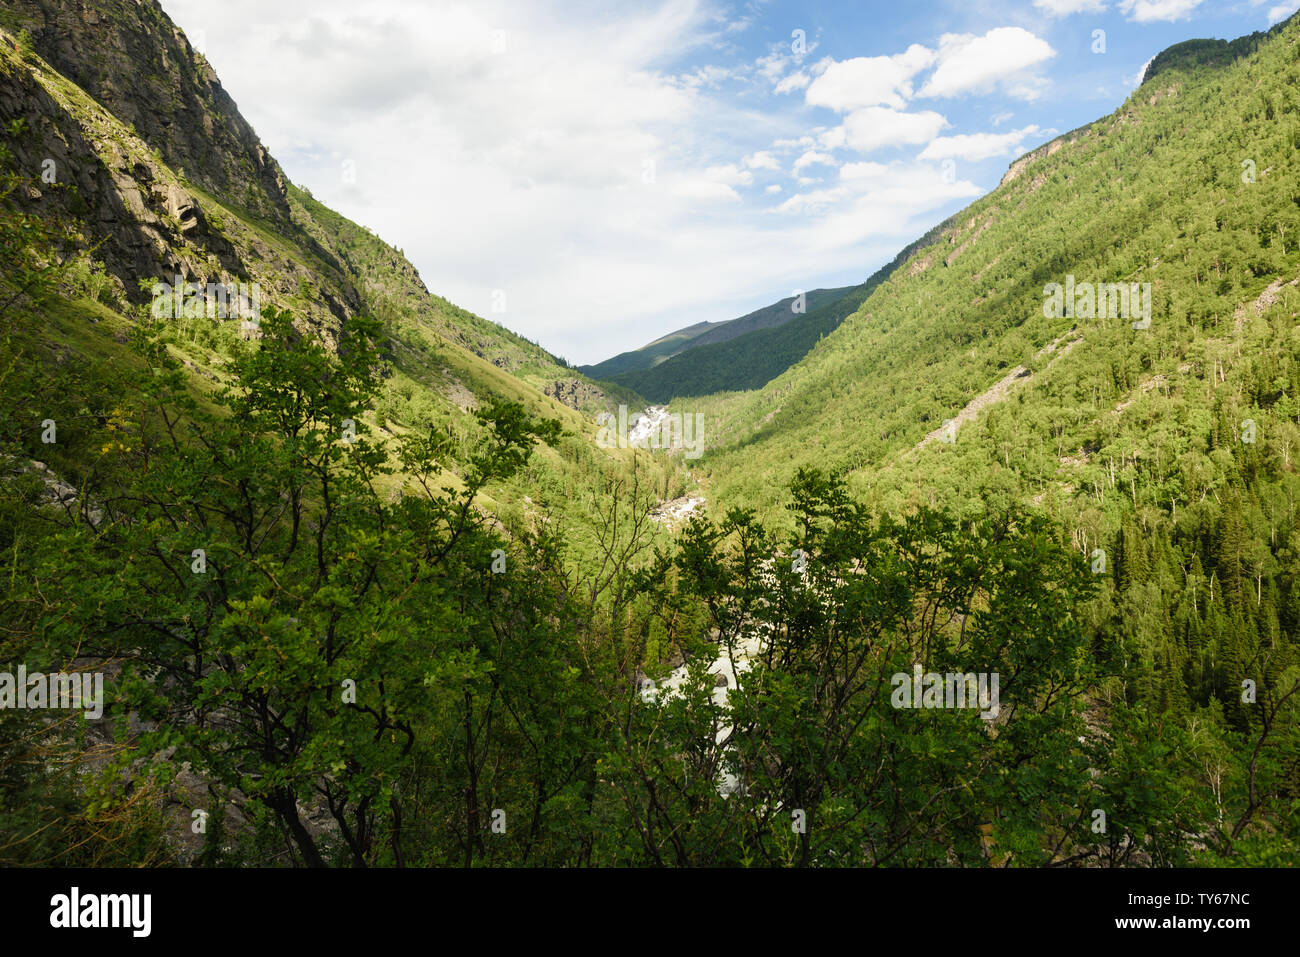 Chulishman valley in mountain Altay the road to Uchar Stock Photo